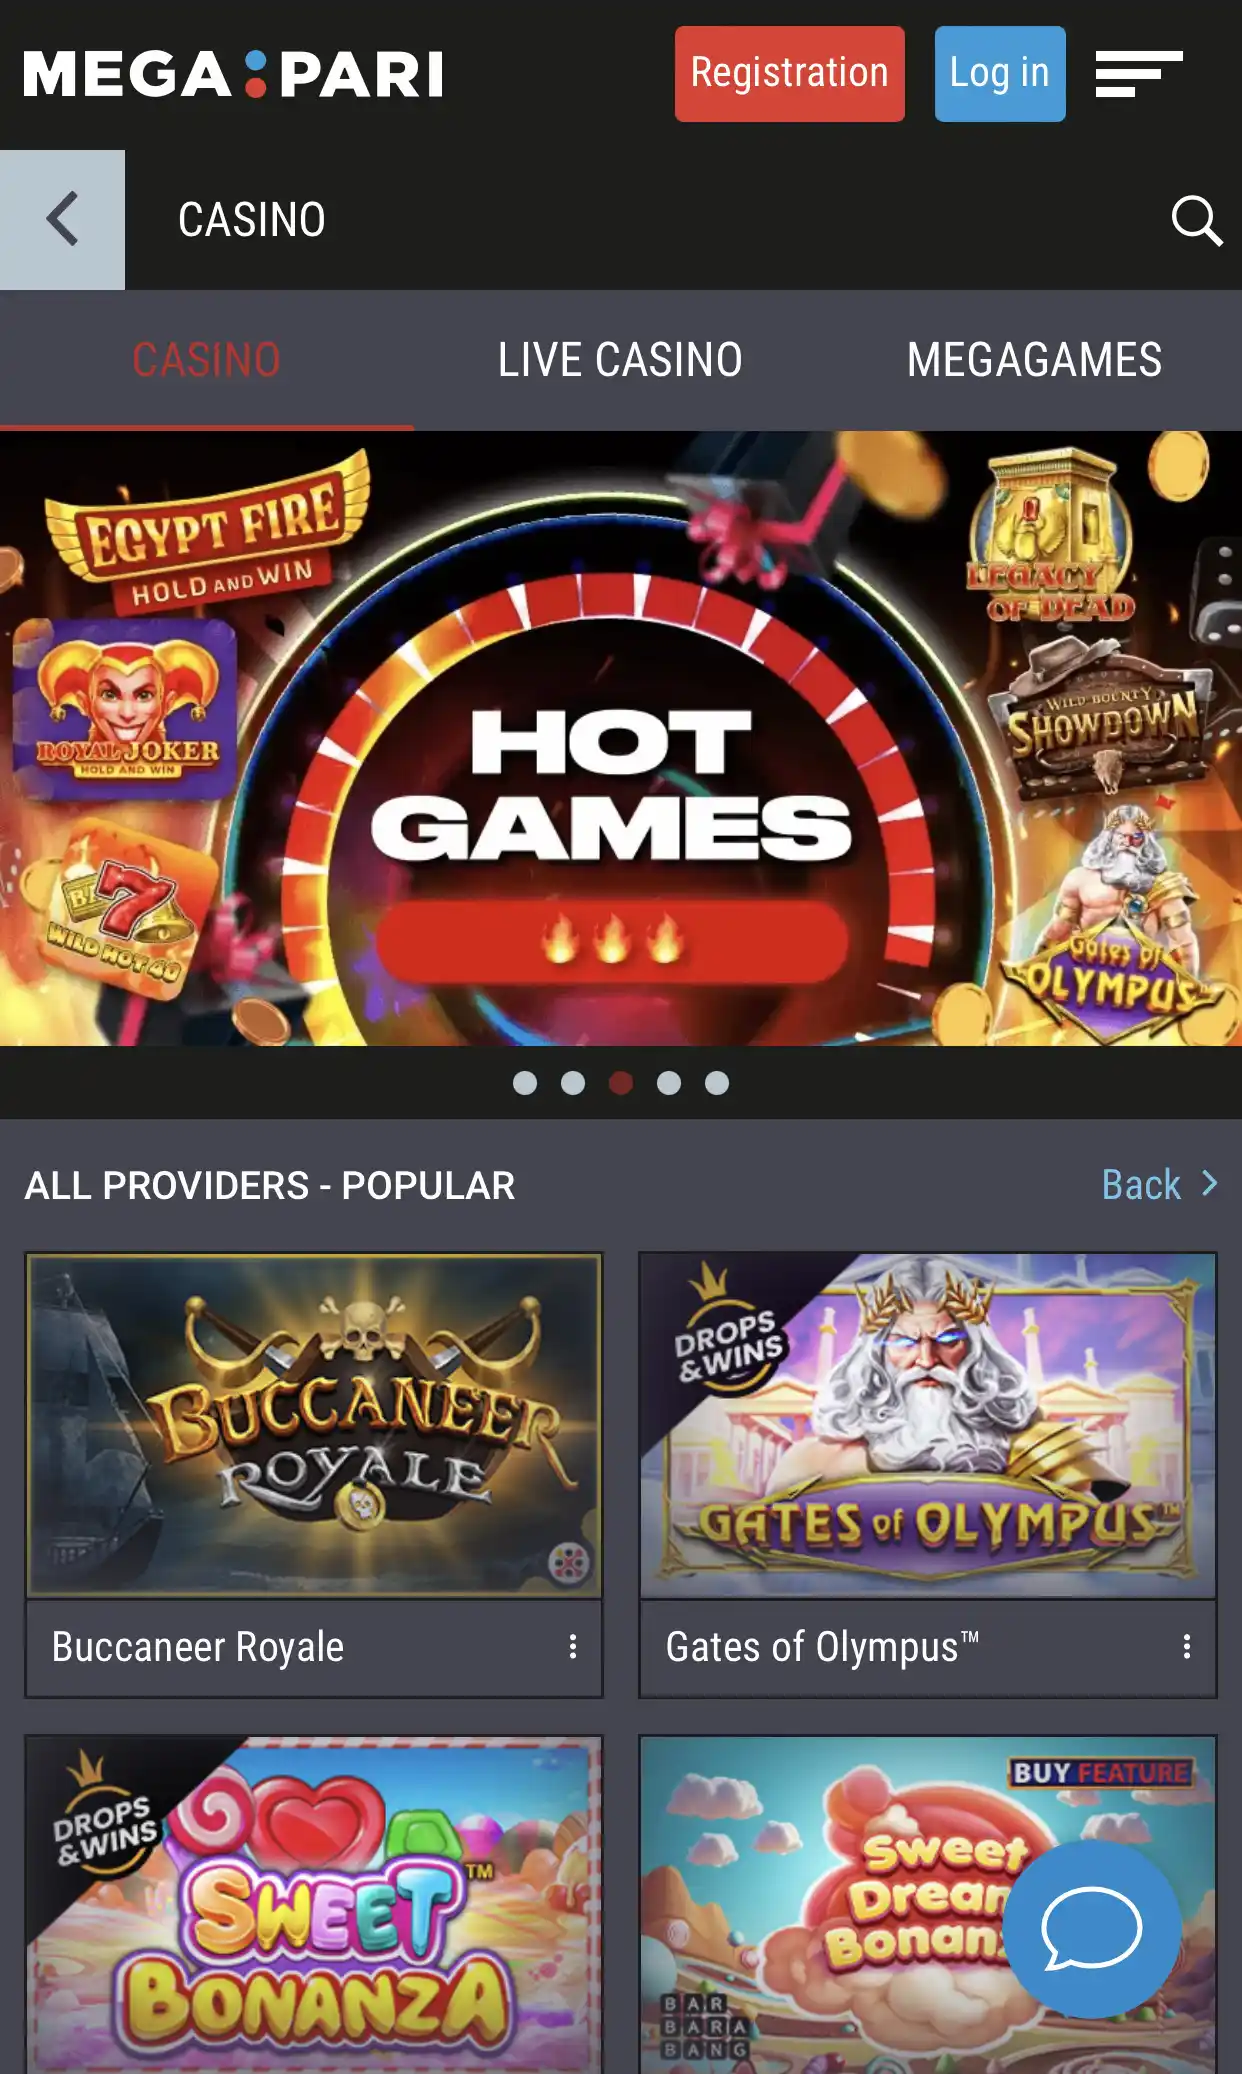 Megapari's casino section features many handy filters to help you find games quickly.